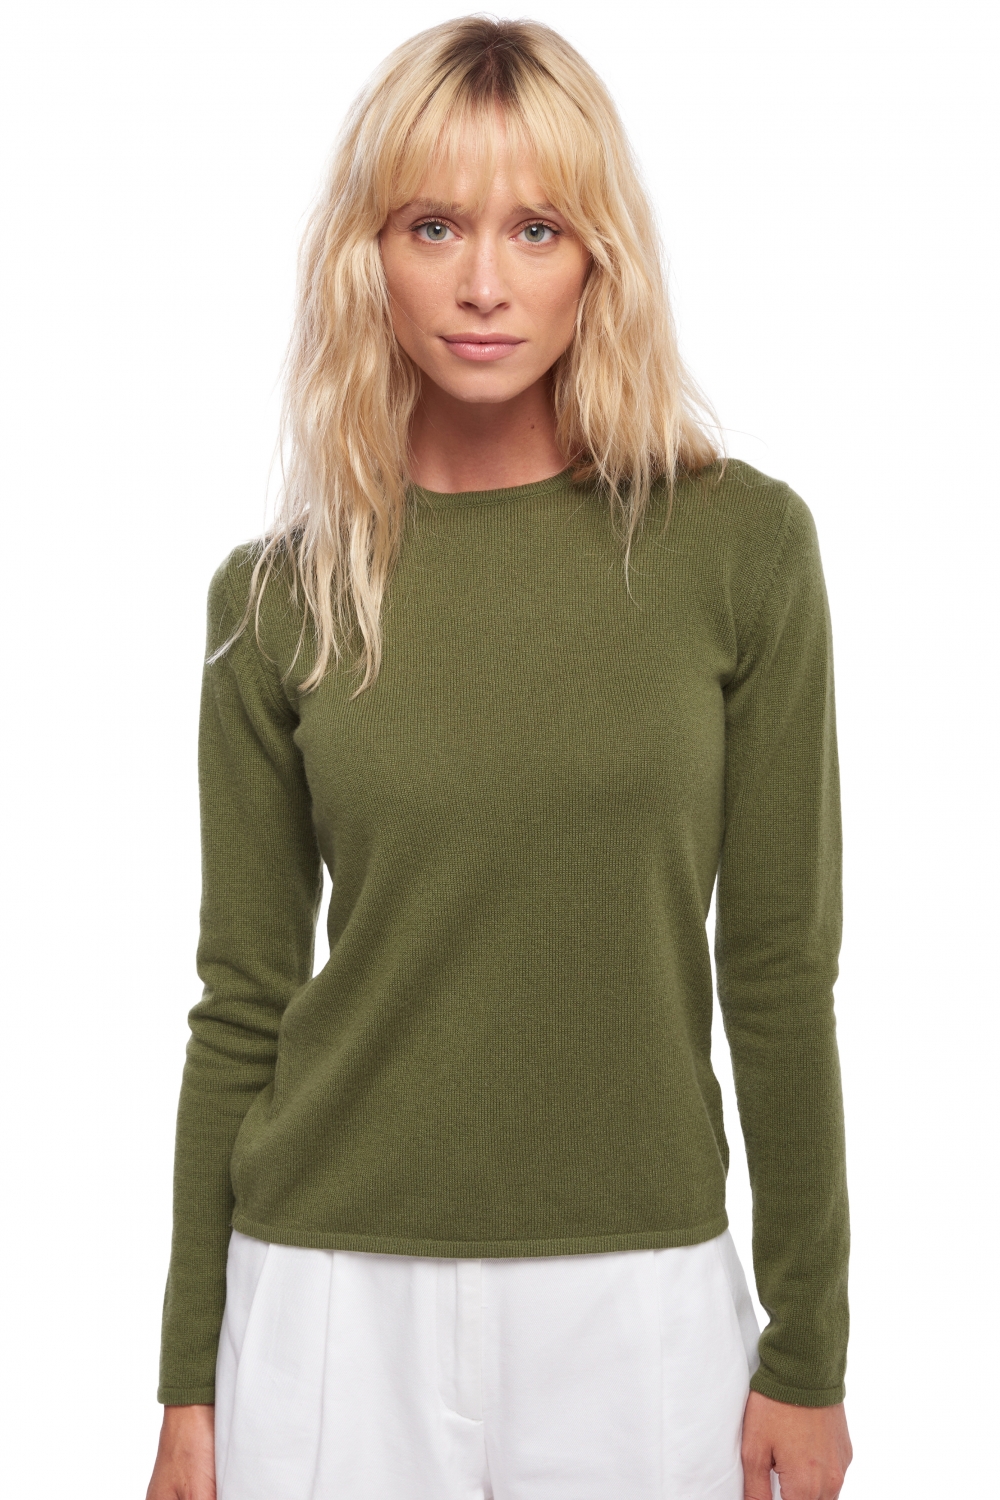 Cashmere ladies timeless classics line ivy green xs